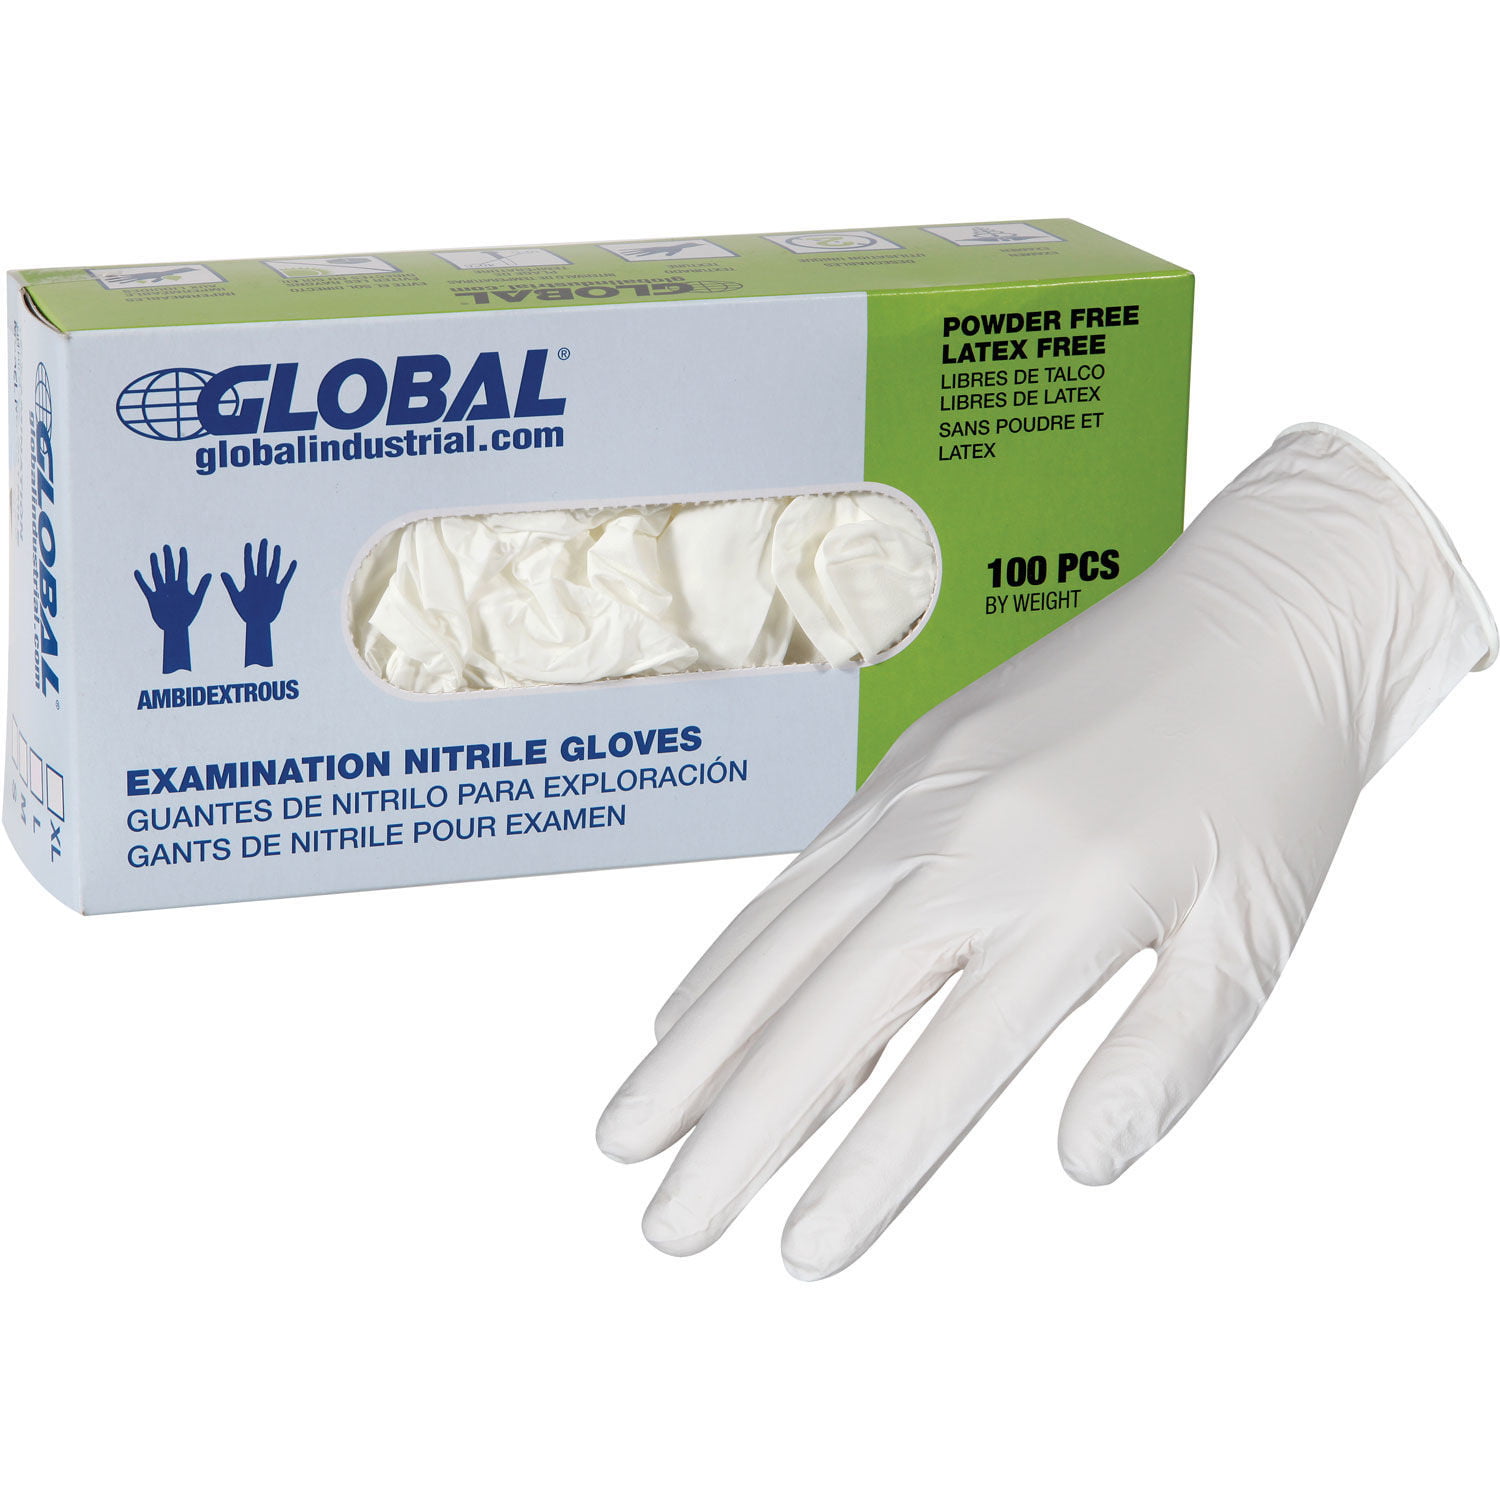 Unigloves Unicare GS0031 Nitrile Examination Gloves Extra Small Set of 100